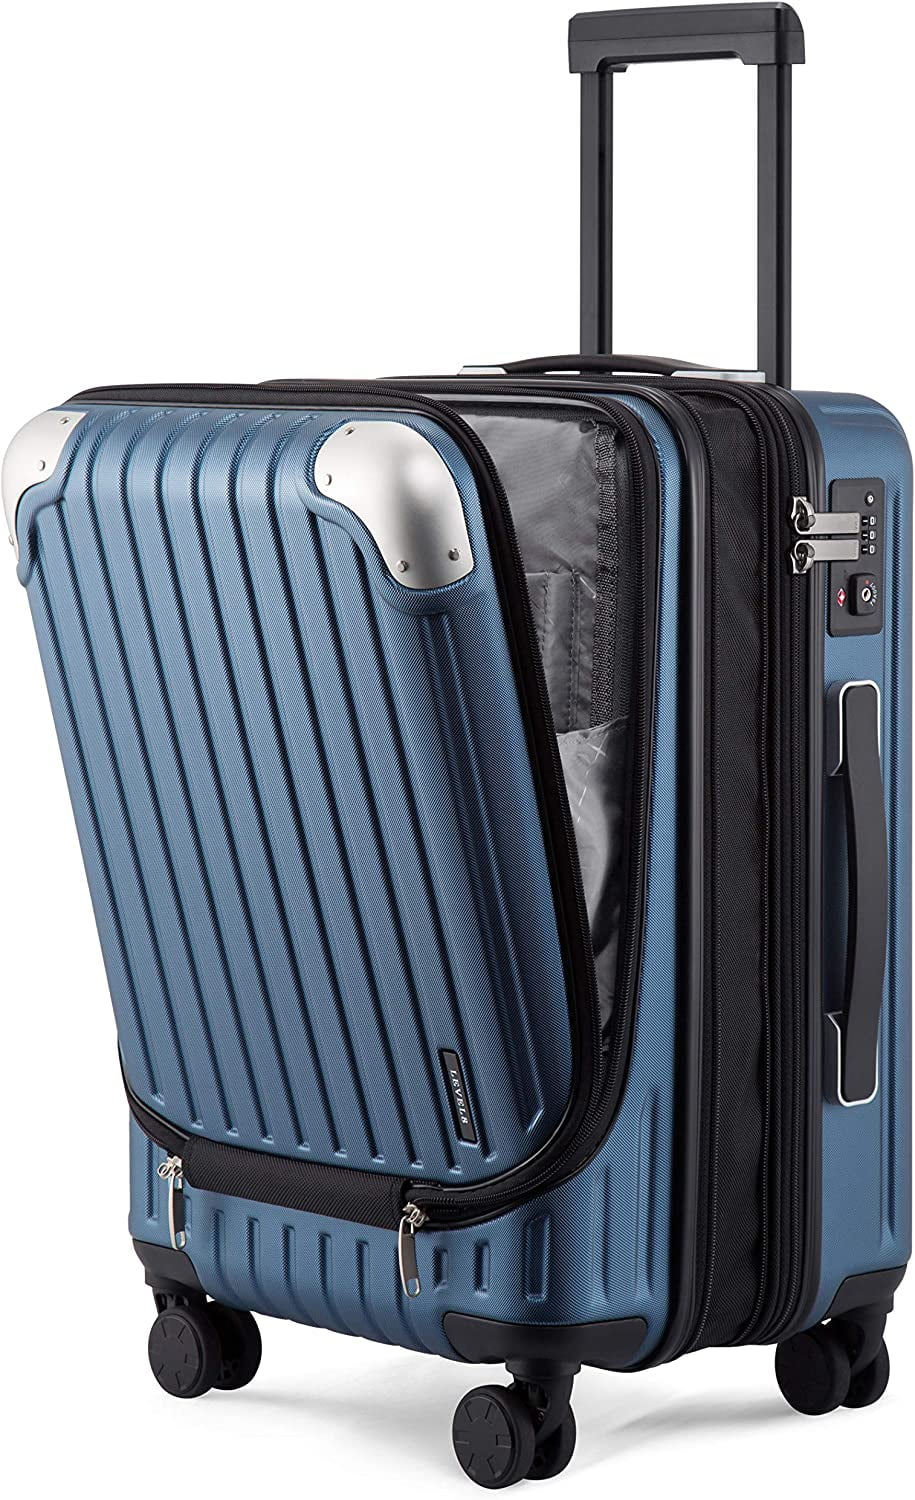 Suitcase LEVEL8 Grace EXT Carry On Luggage 20” Expandable Hardside  Suitcase ABS+PC Harshell Spinner Luggage with TSA Lock Spinner Wheels - Blue  20-Inch Carry-On 